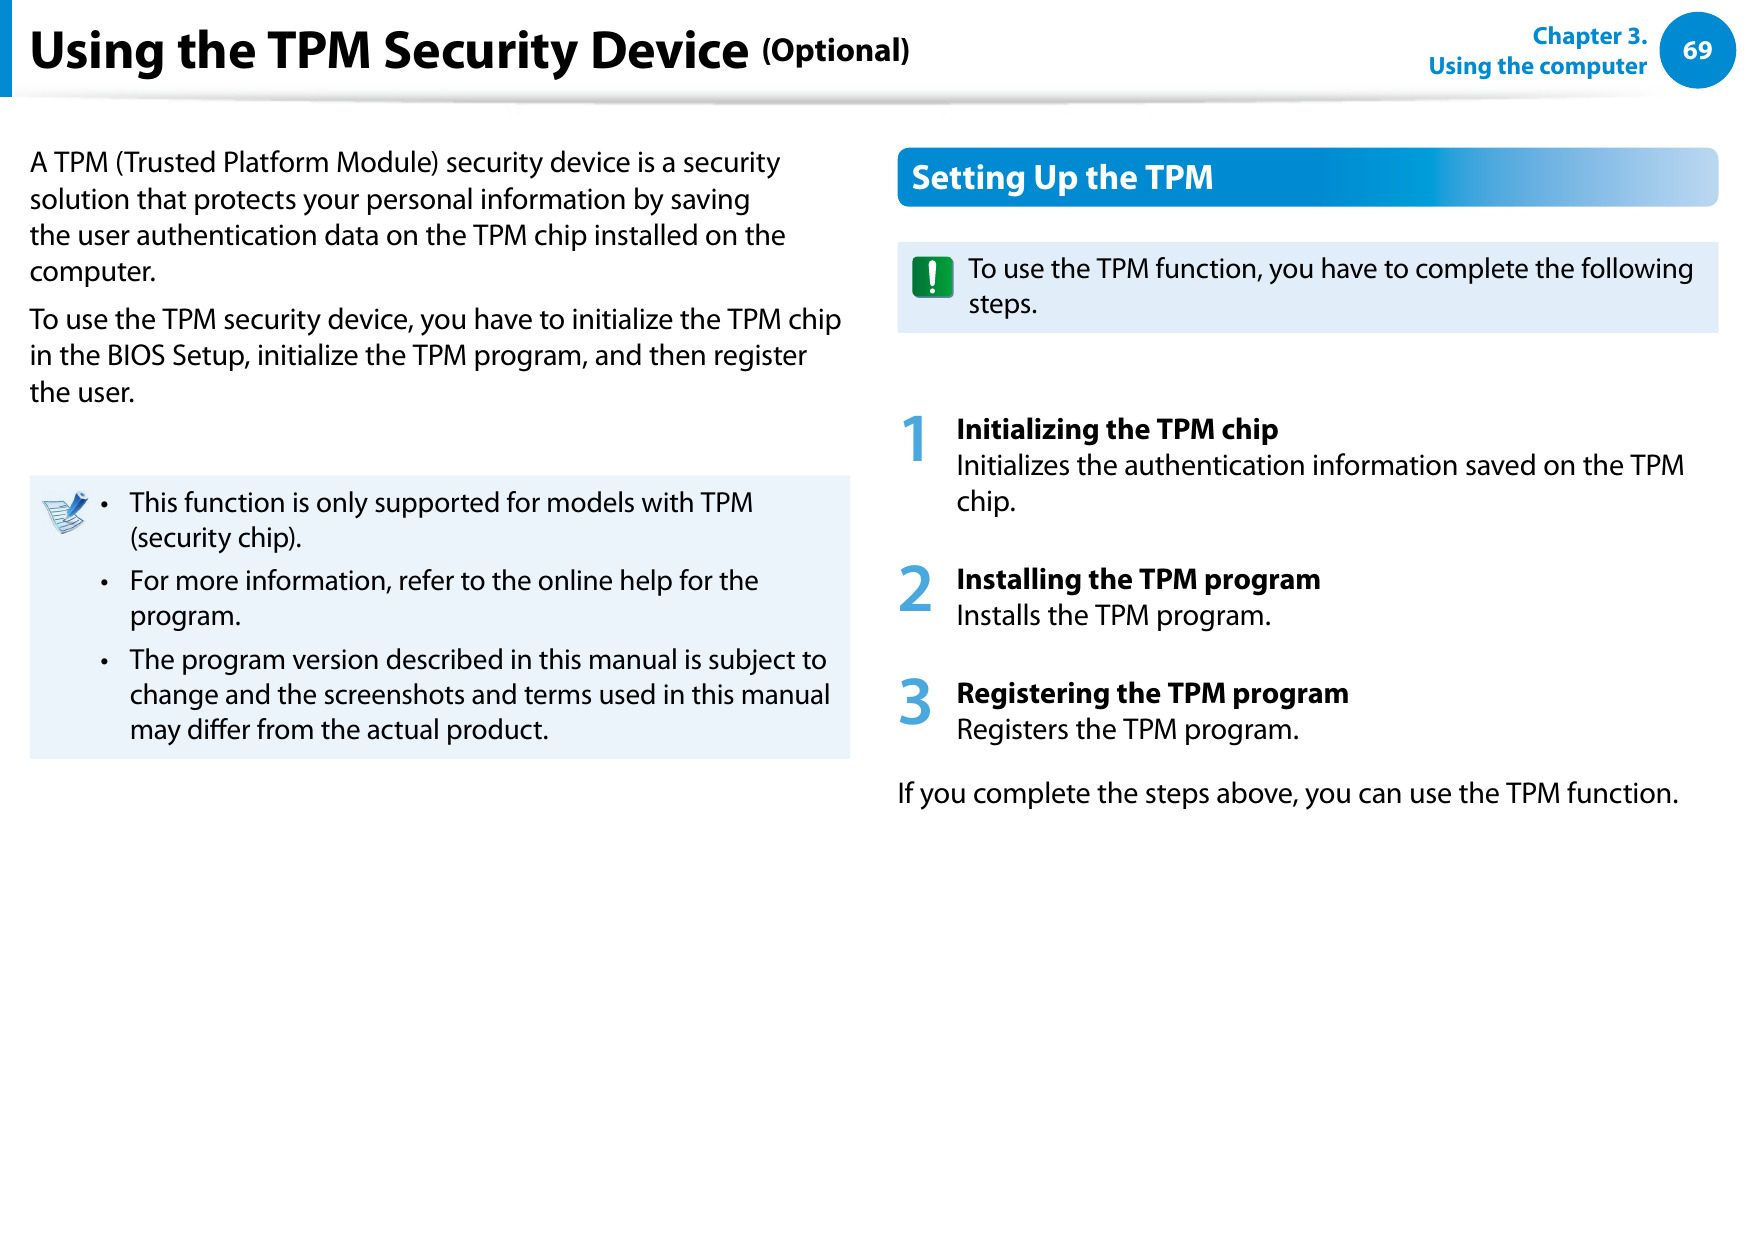 6869Chapter 3.  Using the computerUsing the TPM Security Device (Optional)A TPM (Trusted Platform Module) security device is a security solution that protects your personal information by saving the user authentication data on the TPM chip installed on the computer.To use the TPM security device, you have to initialize the TPM chip in the BIOS Setup, initialize the TPM program, and then register the user.This function is only supported for models with TPM • (security chip).For more information, refer to the online help for the • program.The program version described in this manual is subject to • change and the screenshots and terms used in this manual may dier from the actual product.Setting Up the TPMTo use the TPM function, you have to complete the following steps.1 Initializing the TPM chip Initializes the authentication information saved on the TPM chip.2 Installing the TPM program Installs the TPM program.3 Registering the TPM program Registers the TPM program. If you complete the steps above, you can use the TPM function.